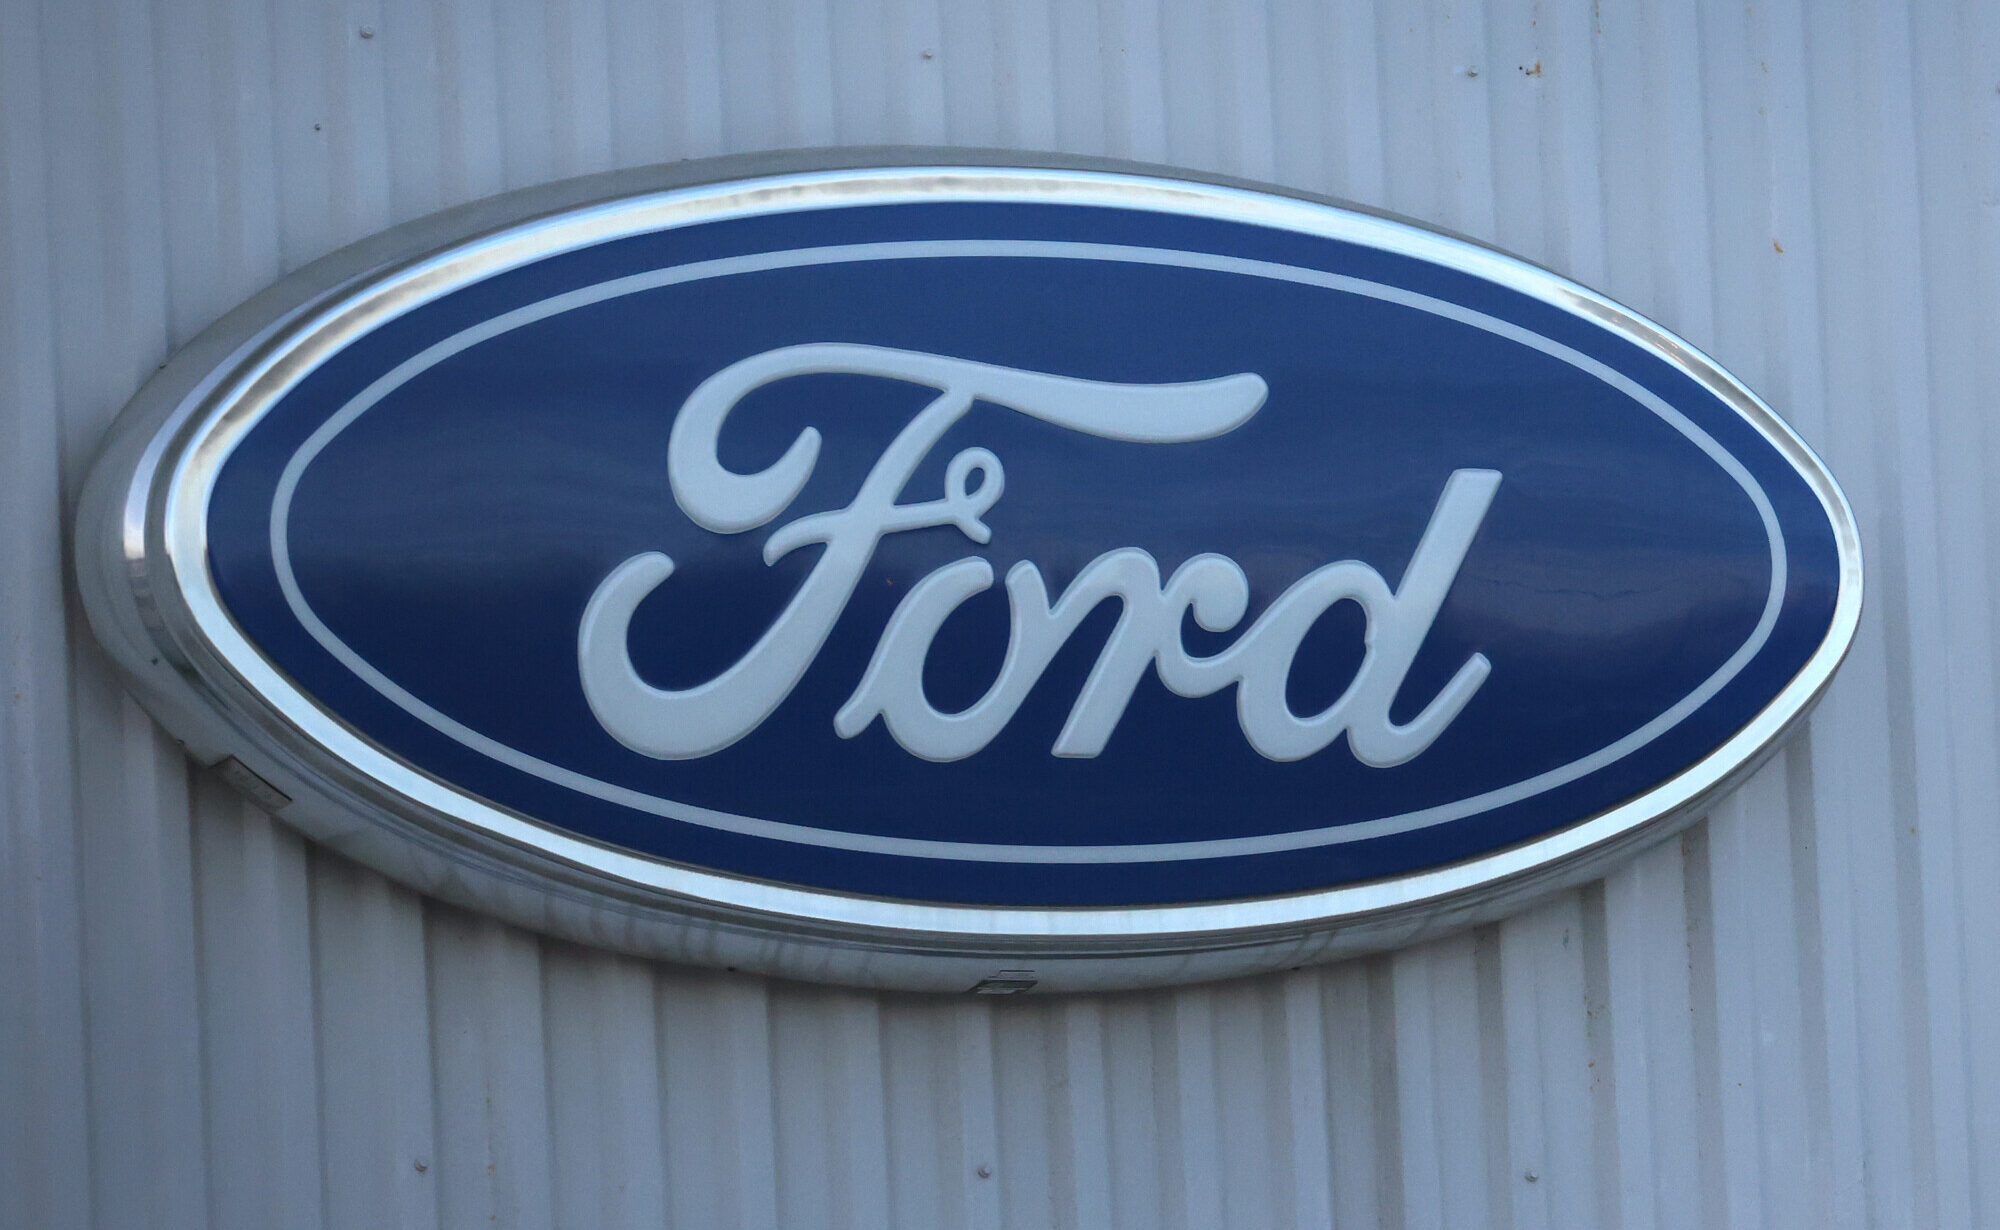 Union Criticizes Ford for Moving Production Project to Mexico